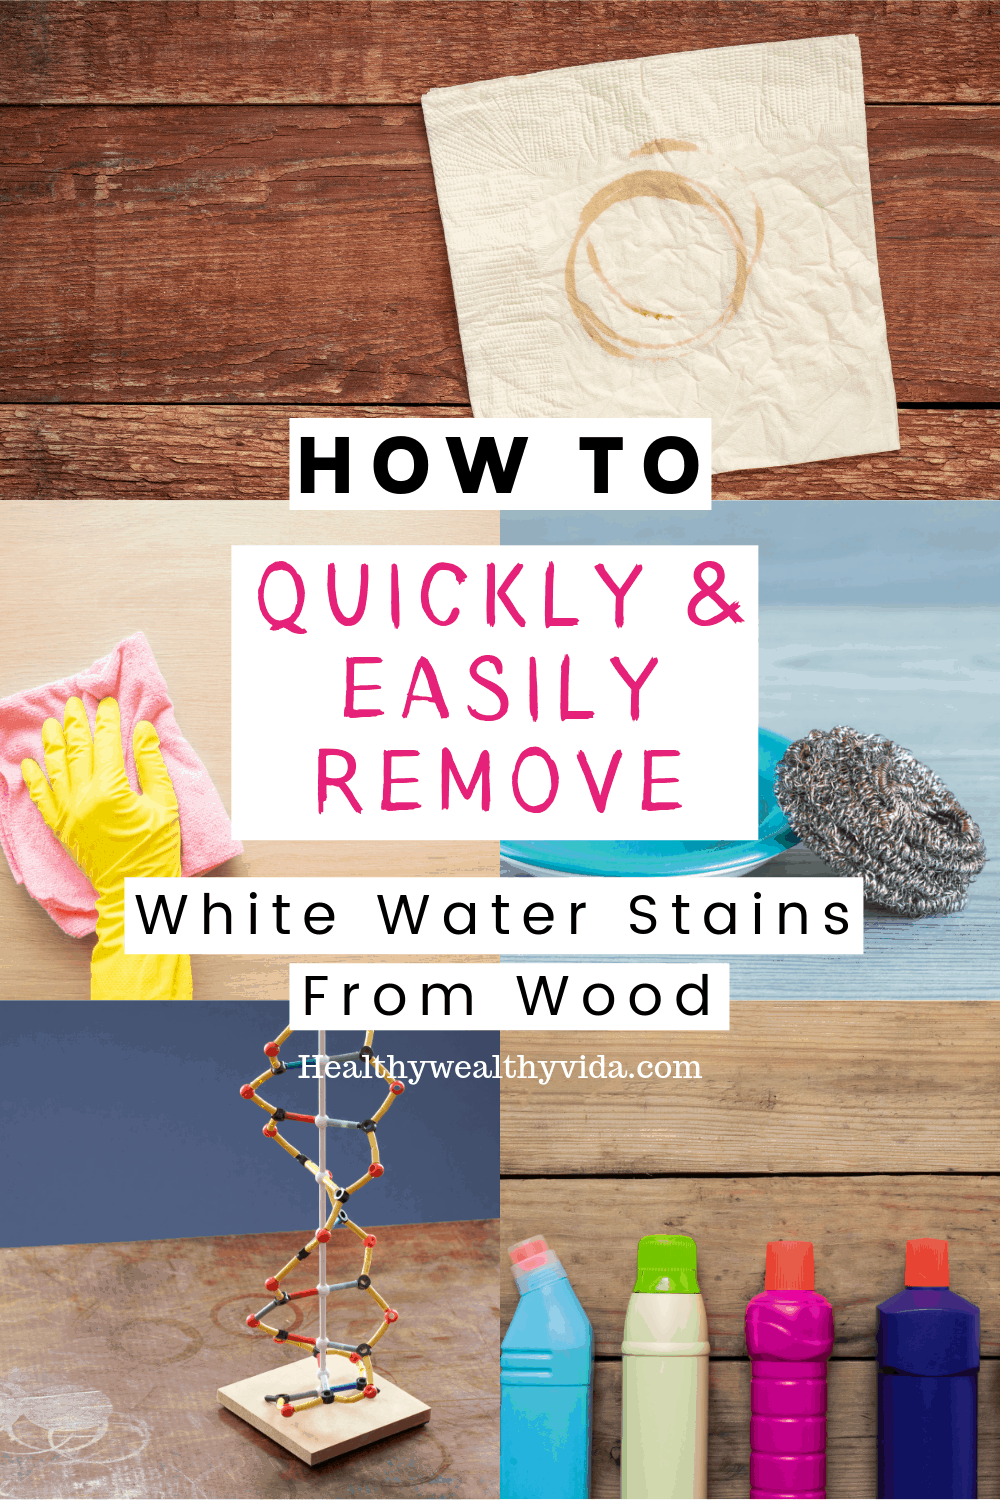 Remove White Water Stains From Wood